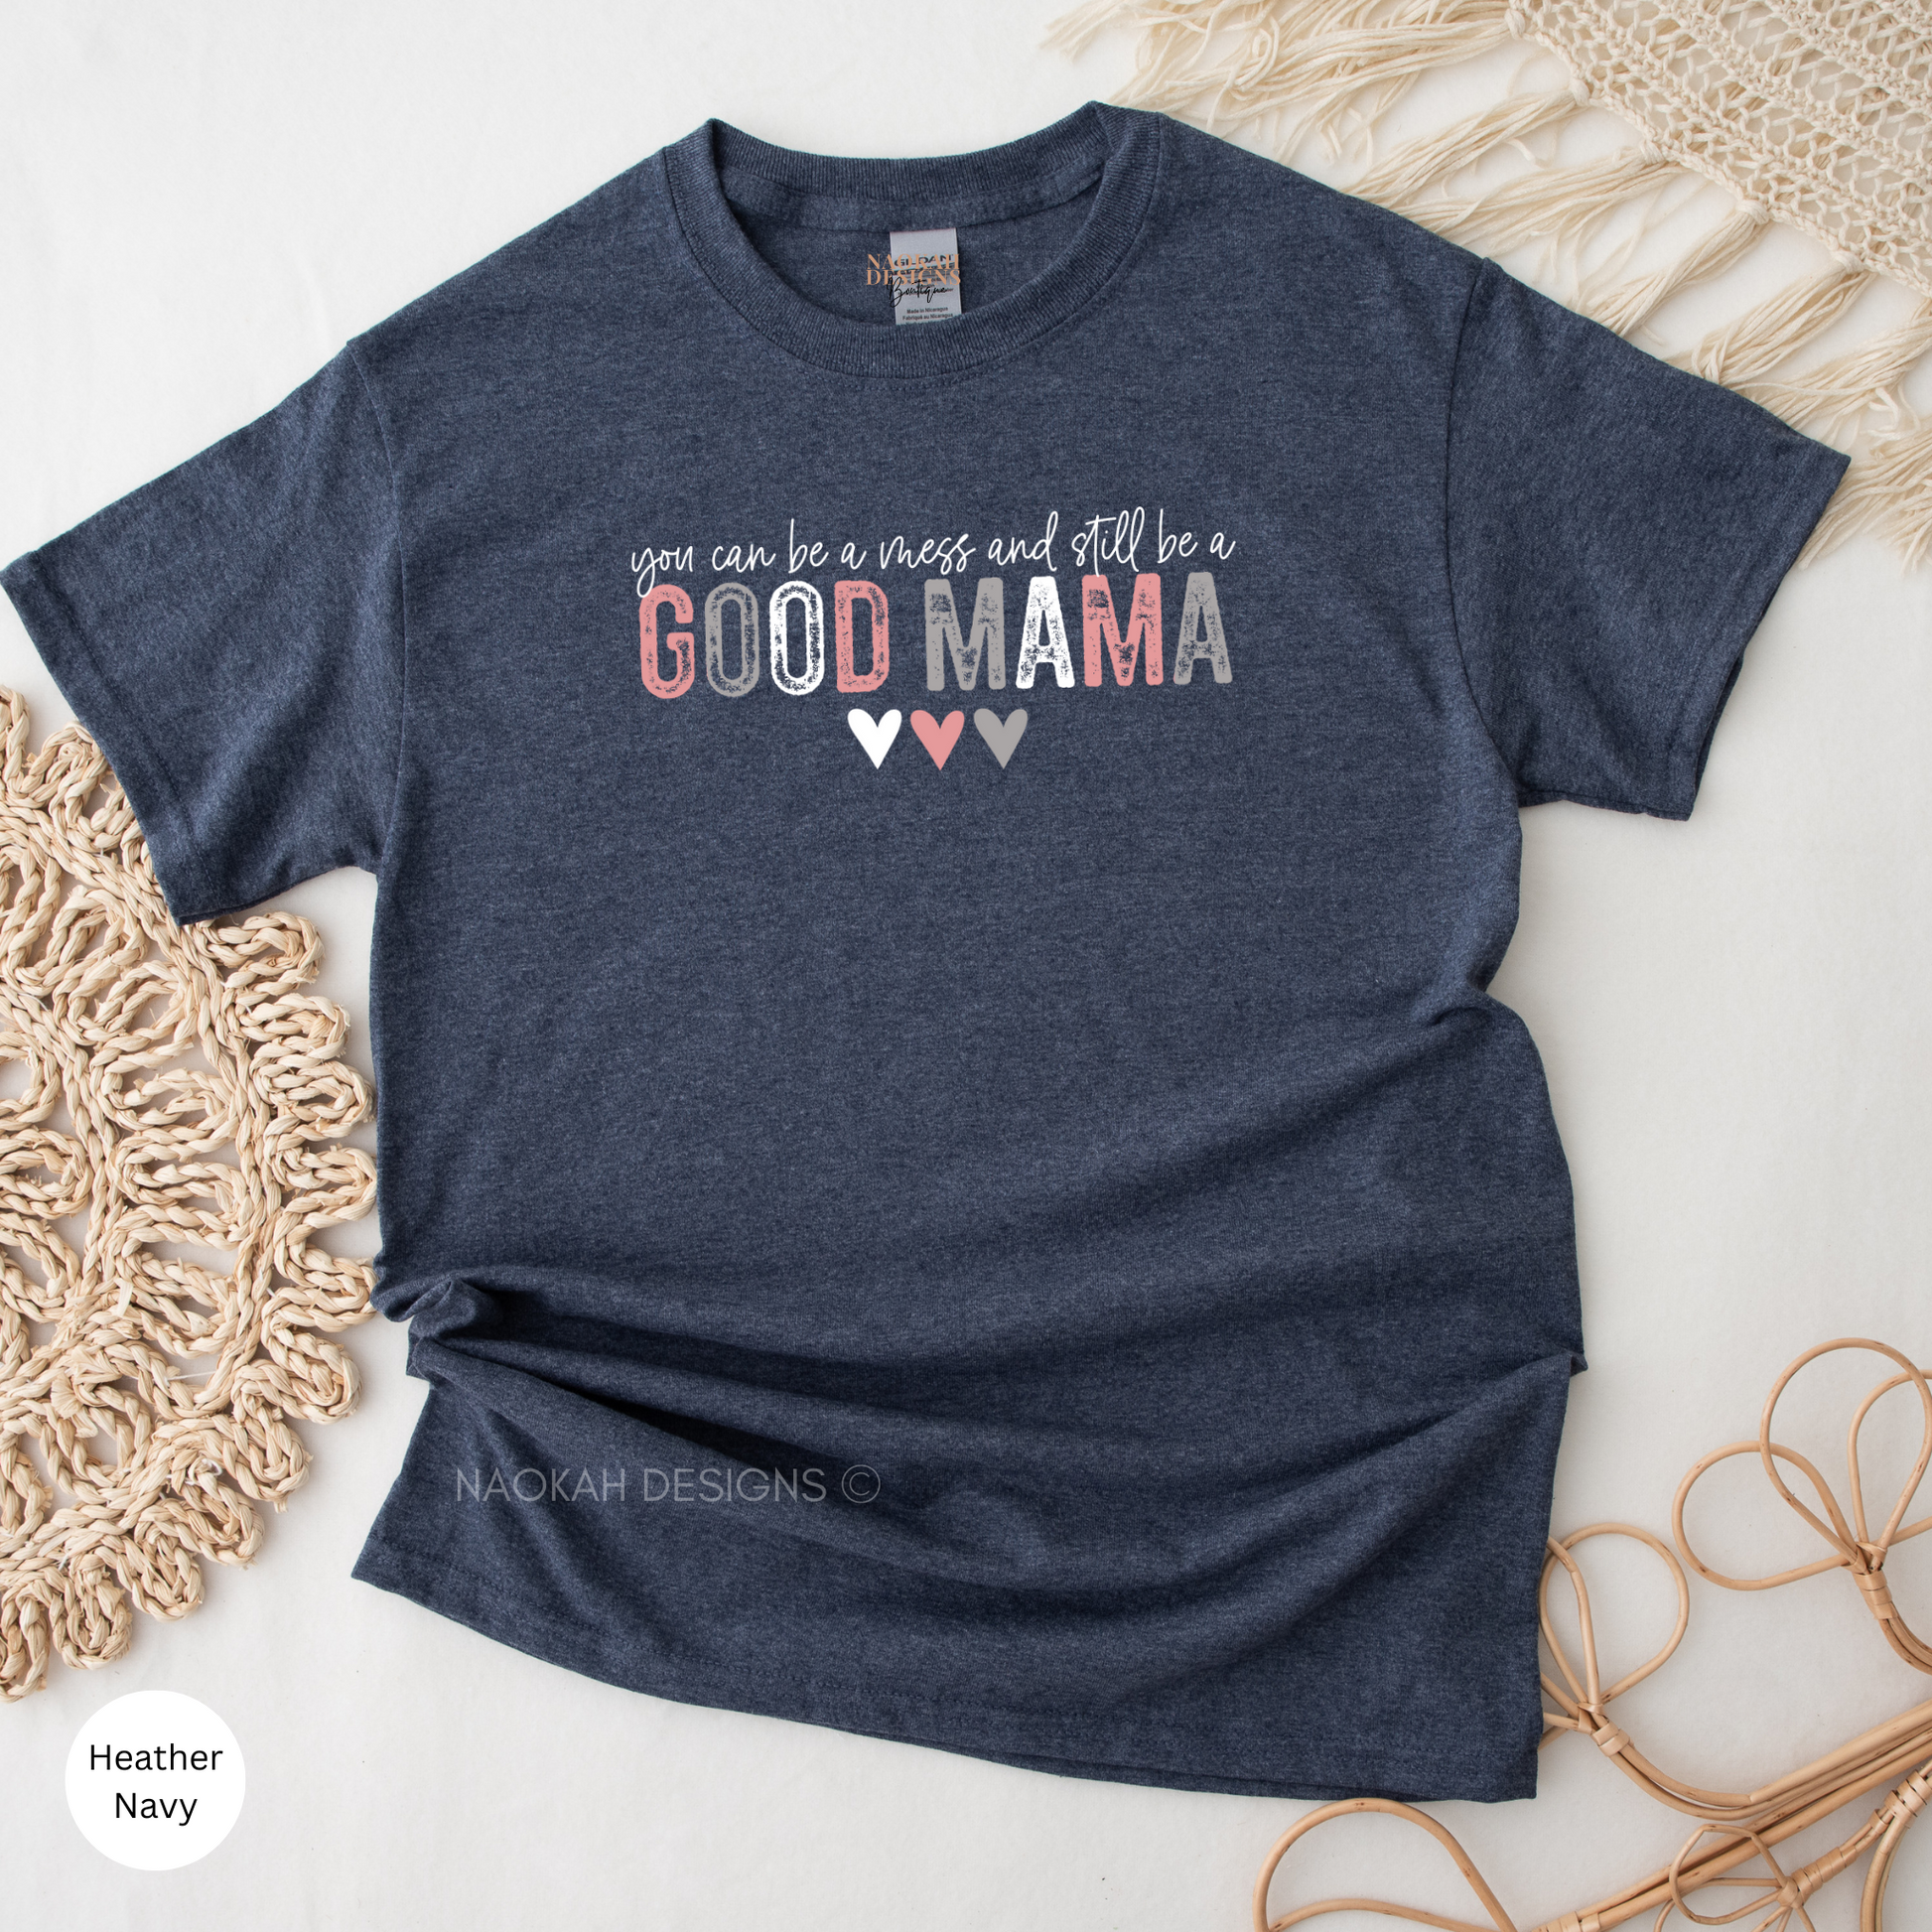 You Can Be A Mess And Still Be A Good Mama Shirt, Tired Moms Club Shirt, Mama Tried Shirt, Thou Shalt Not Try Me Shirt, Hot Mess Tee